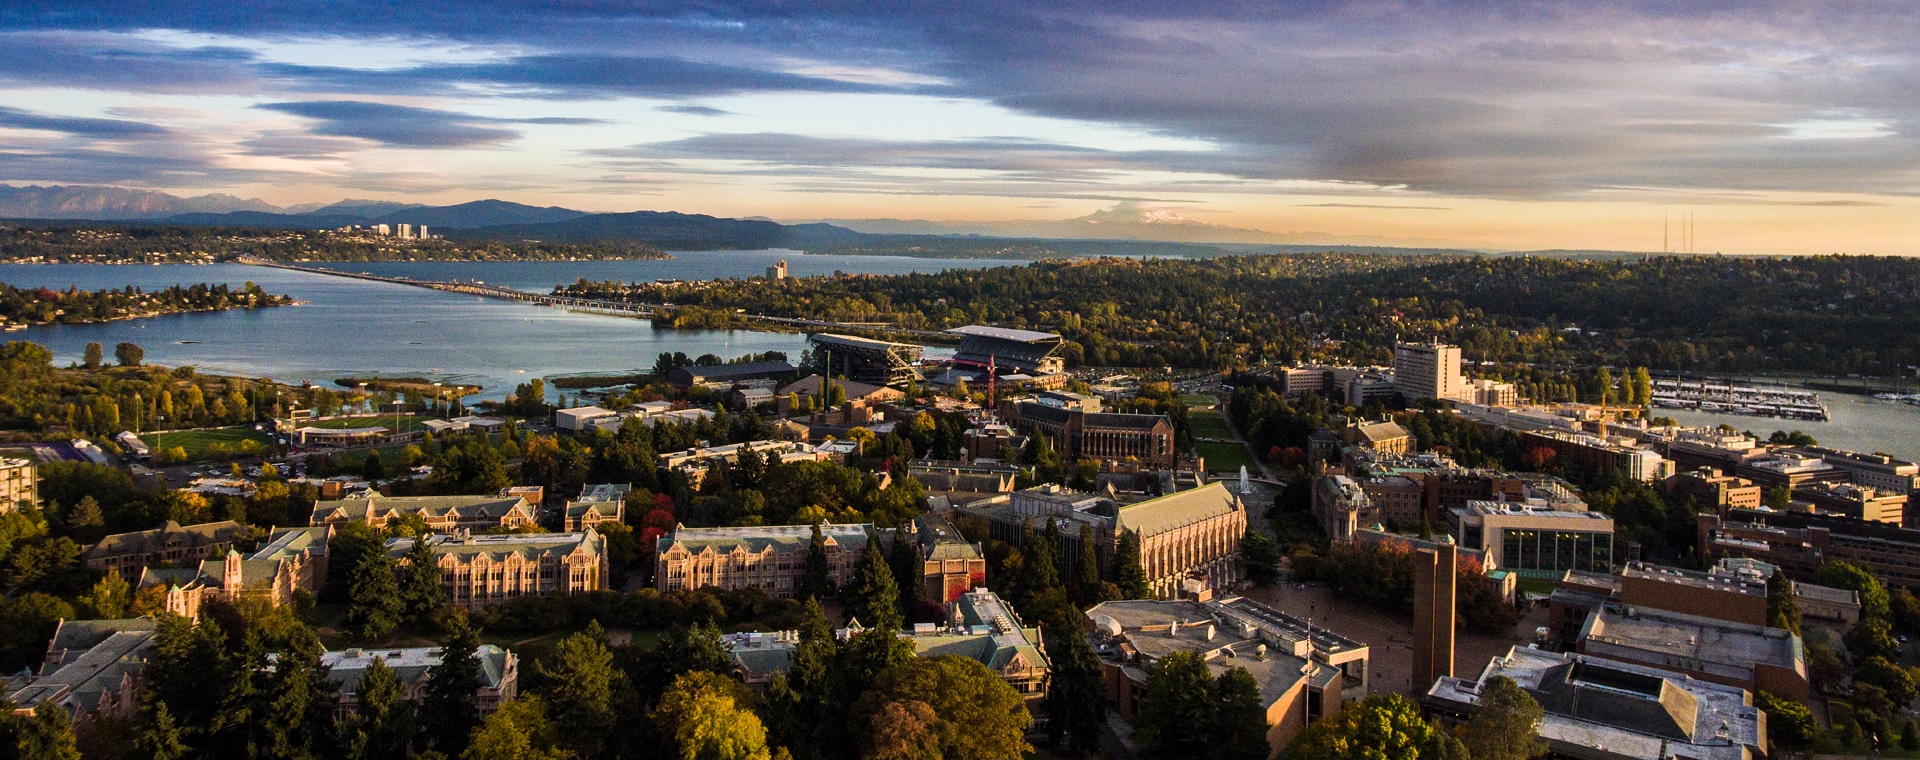 UW campus with Lake Washington and Mount Rainier in the background